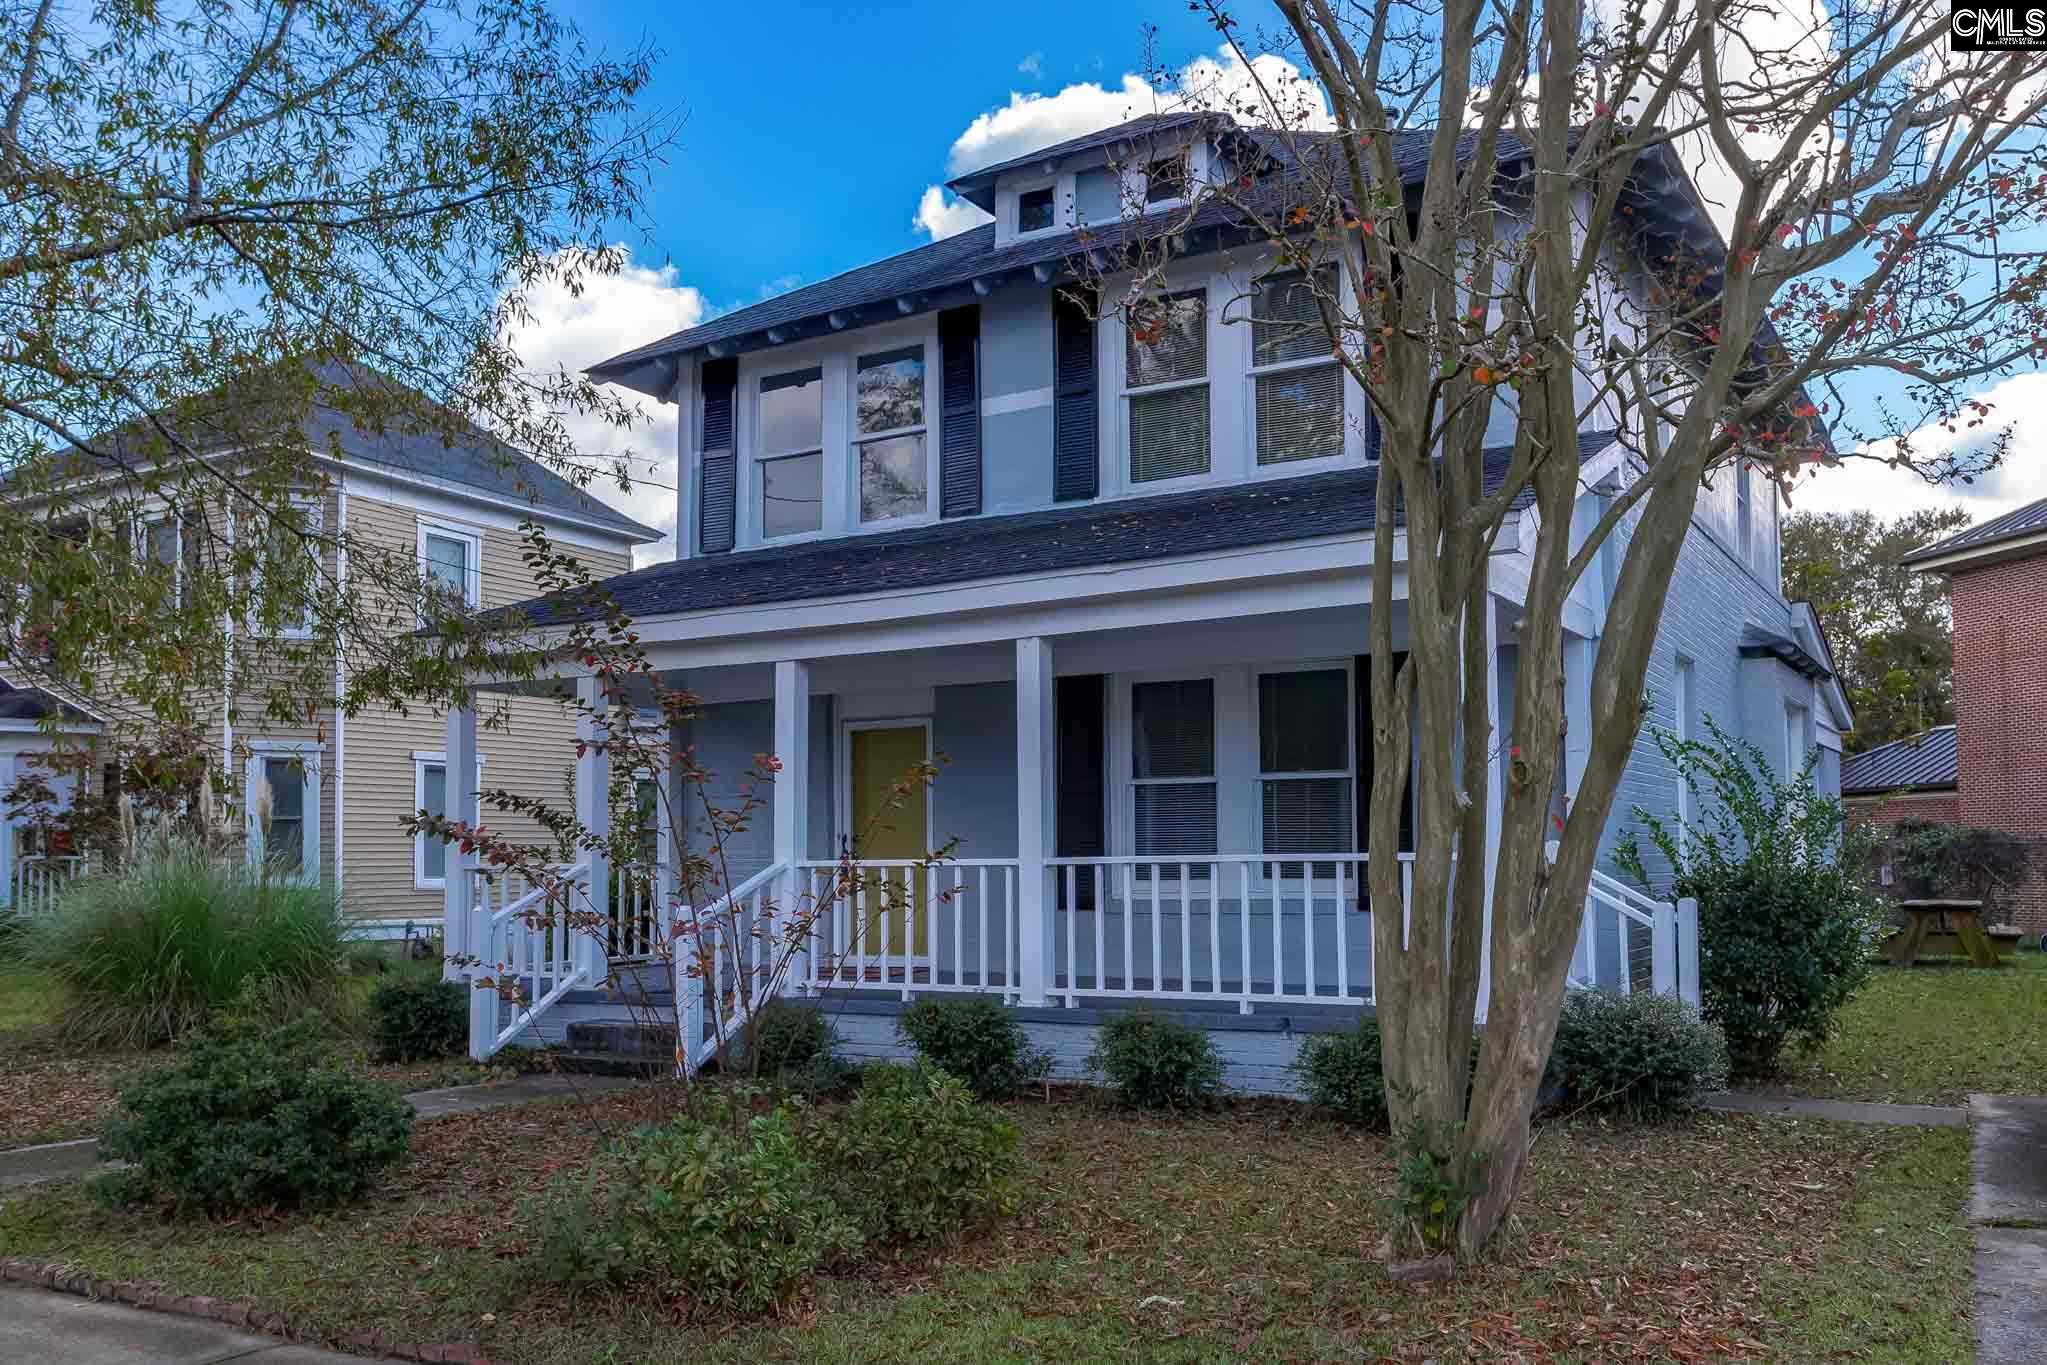 4910 Colonial Columbia, SC 29203-6024